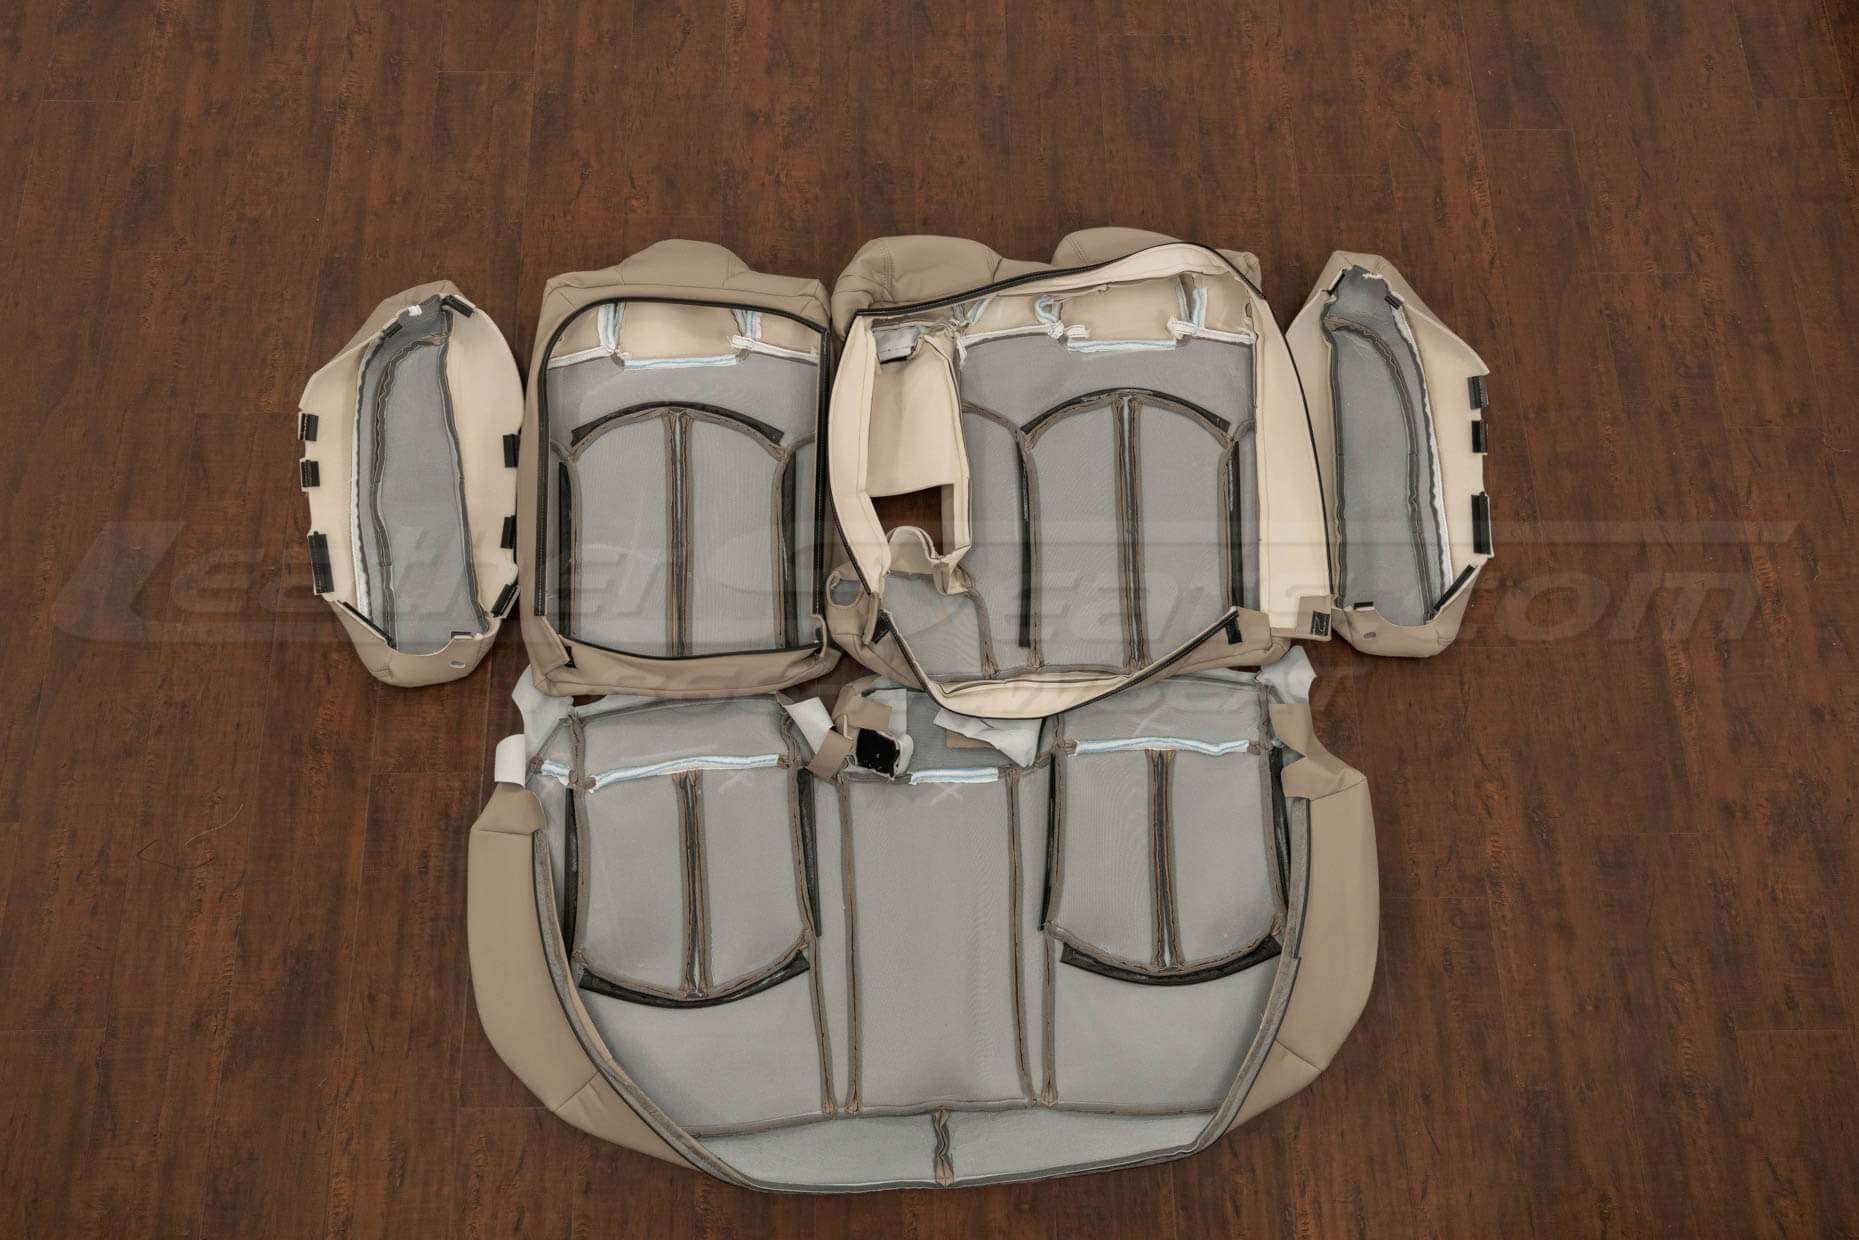 Back view of rear seats with bolsters